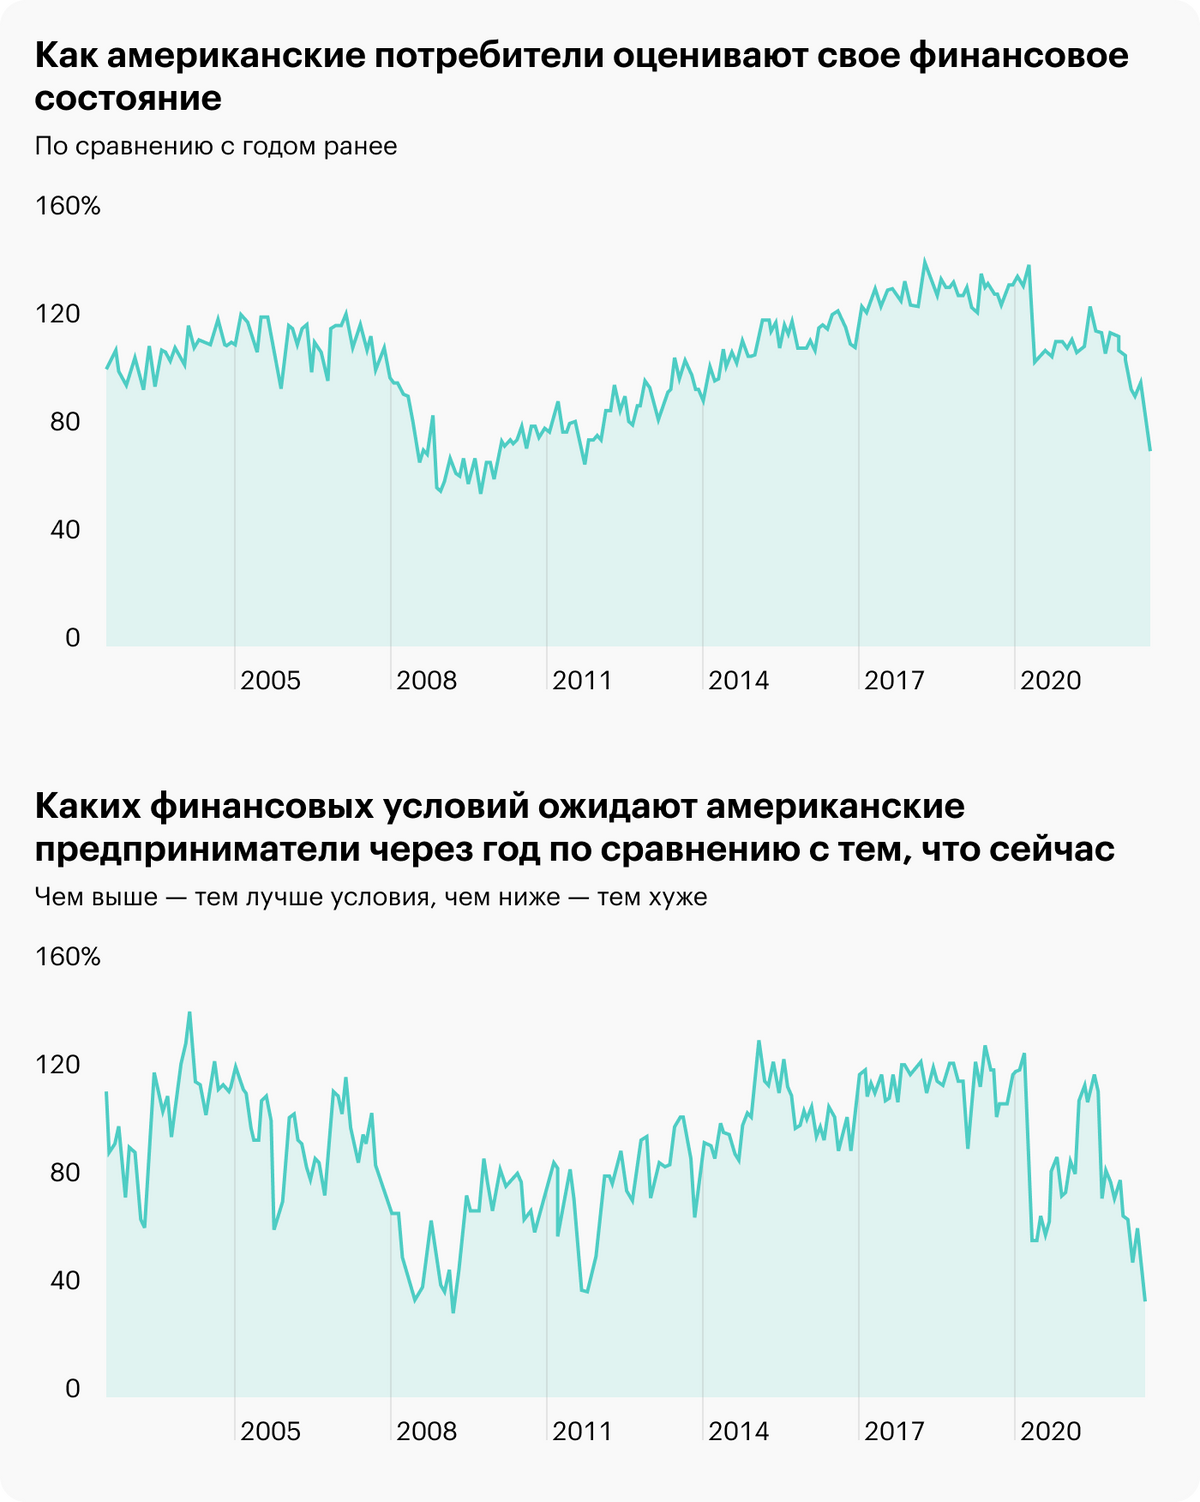 Источник: Daily Shot, Current financial situation, Expected business conditions